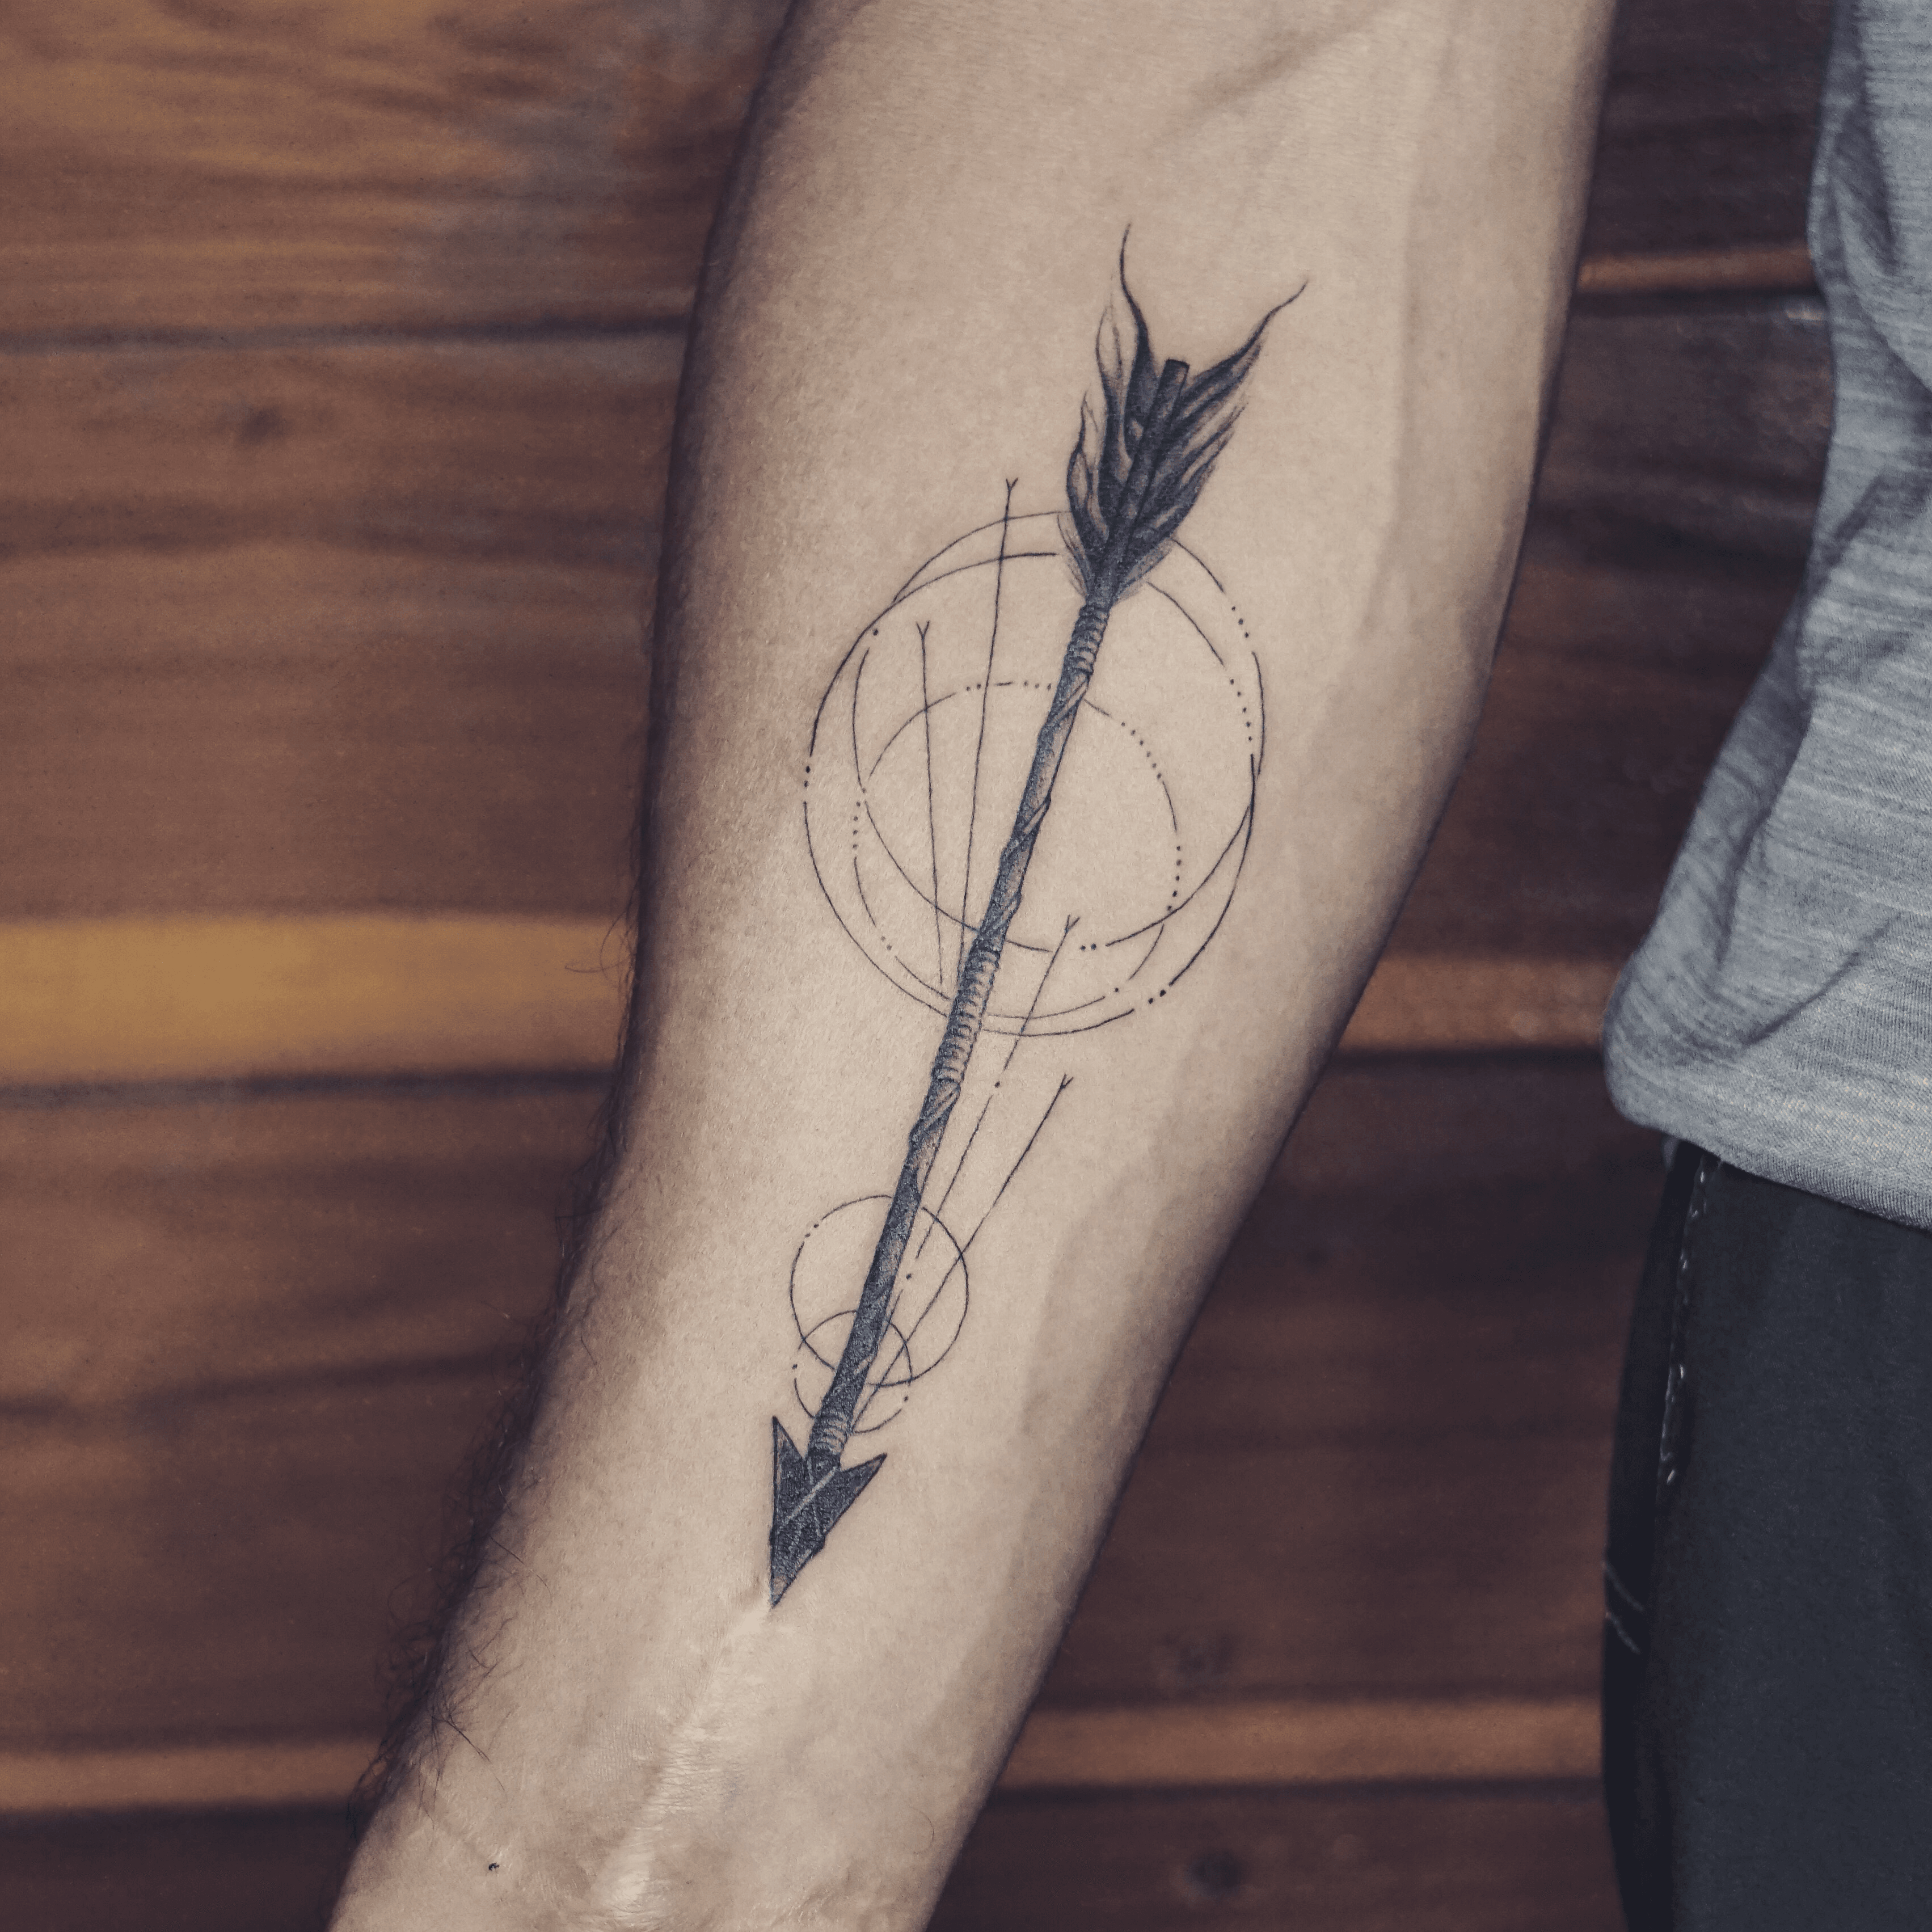 10 Best Arrow Tattoo Ideas Youll Have To See To Believe 